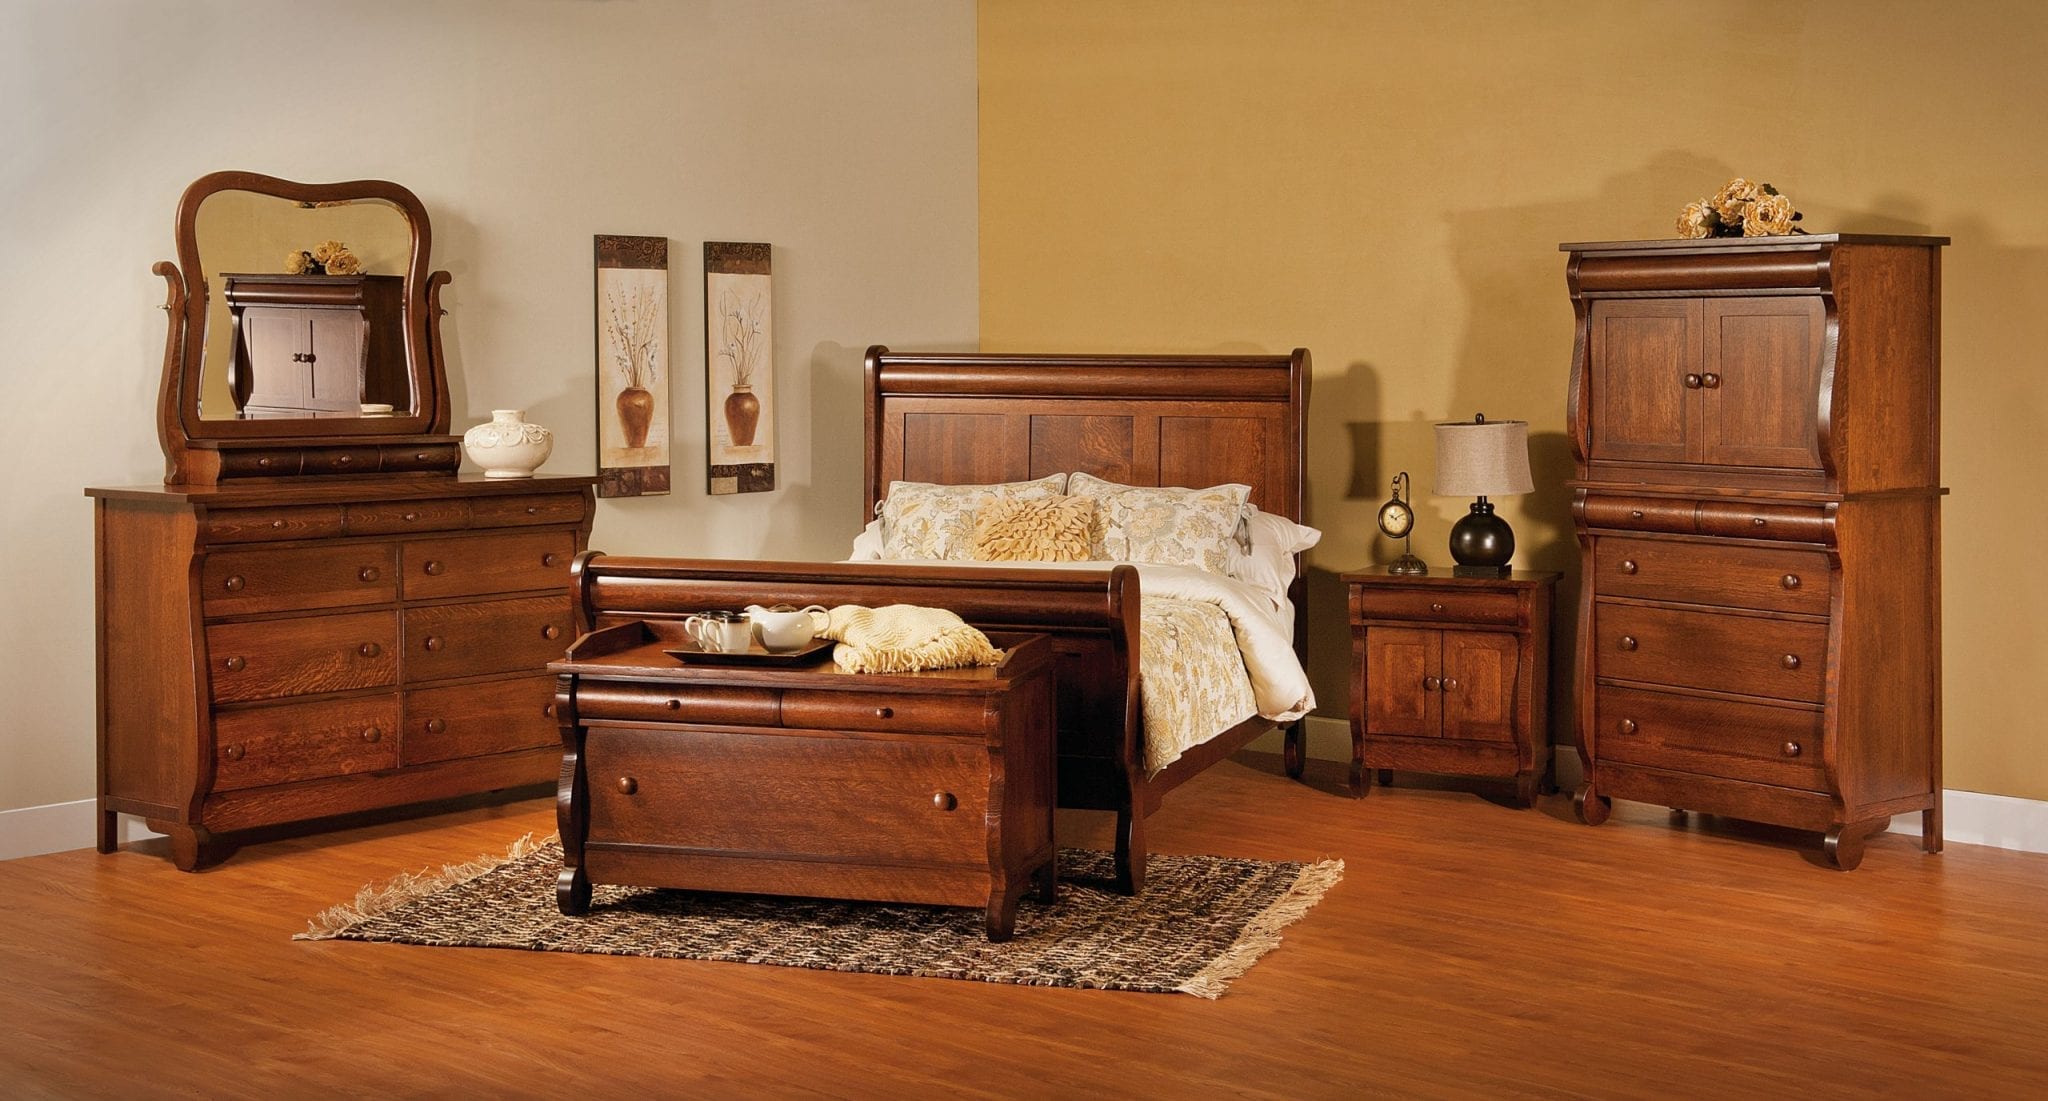 antique sleigh bedroom furniture peice names